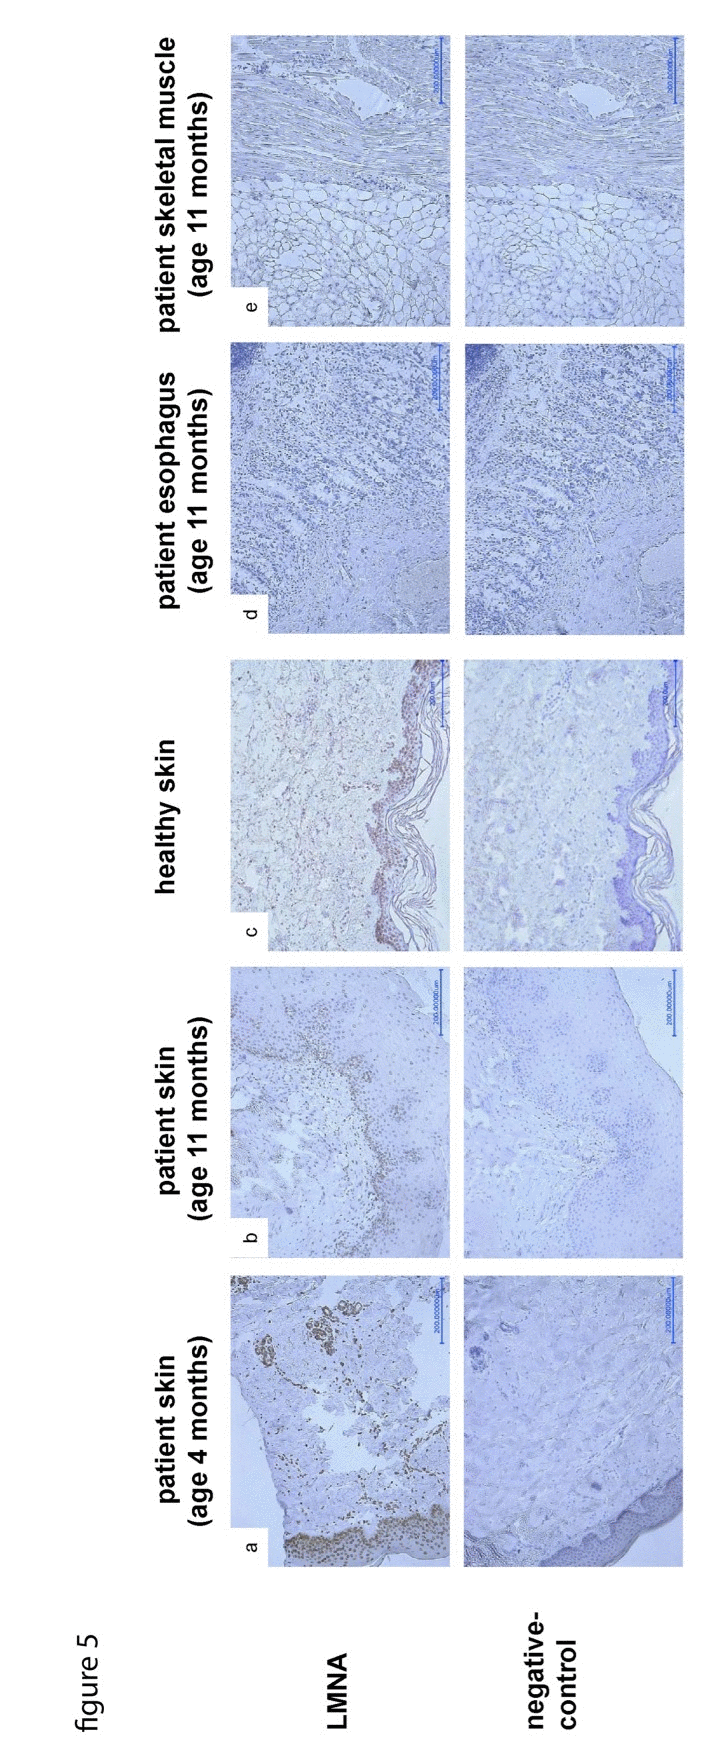 LMNA-staining of skin samples taken at age of 4 (a) and 11 (b) months respectively, shows decreasing amount and signal intensity of LNMA-positive nuclei in the dermo-epidermal junction zone compared to control skin (c). As a secondary finding, the rete ridges are progressively flattened, the skin appendages are poorly developed. LMNA-staining of samples taken from esophagus (d) and skeletal muscle (e) during autopsy does not detect any LMNA signal.